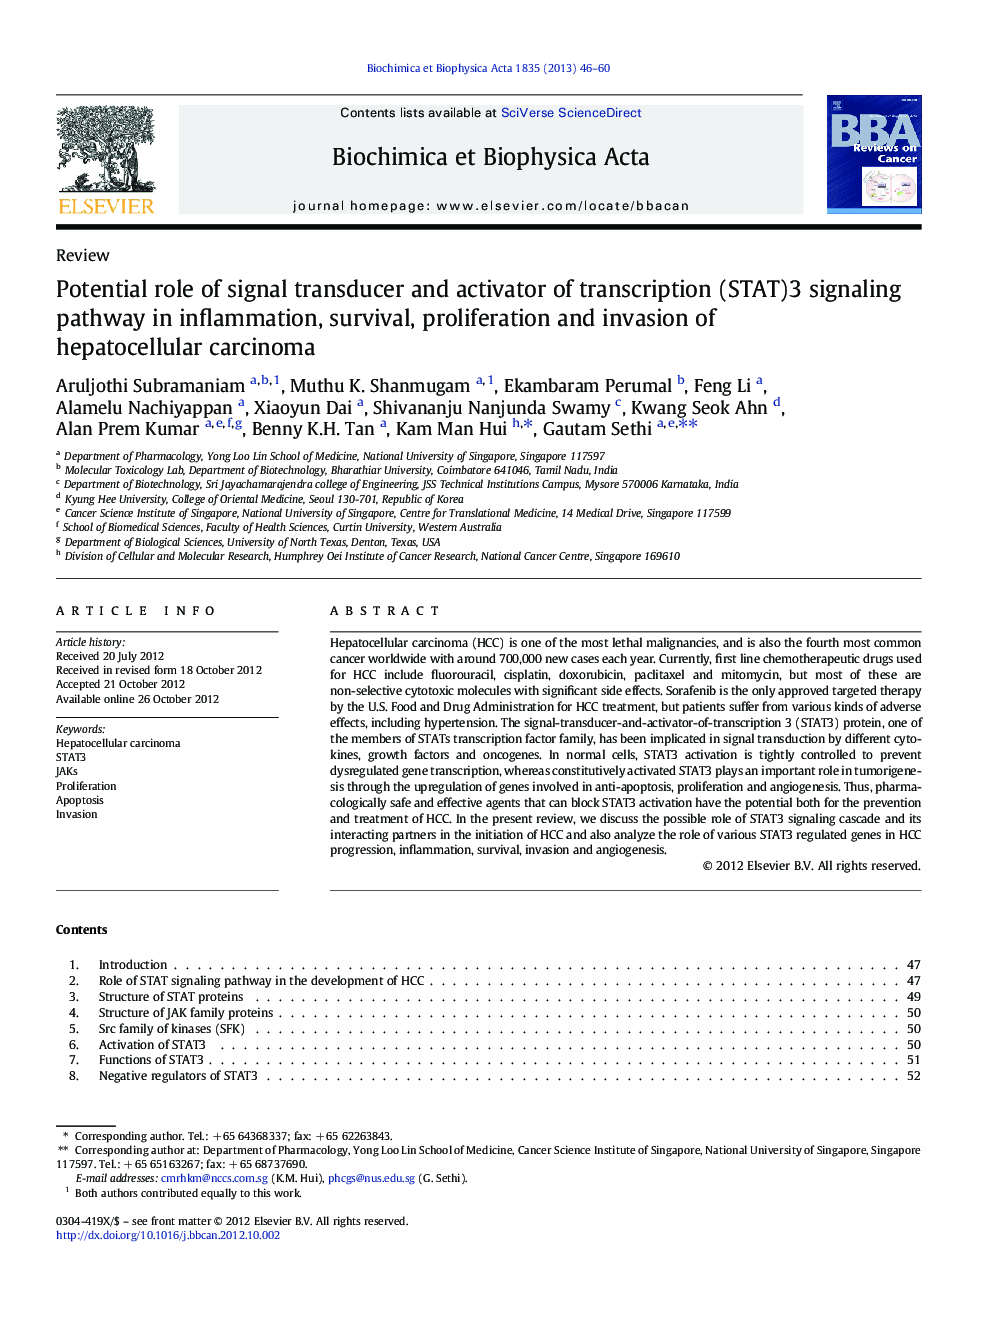 Potential role of signal transducer and activator of transcription (STAT)3 signaling pathway in inflammation, survival, proliferation and invasion of hepatocellular carcinoma